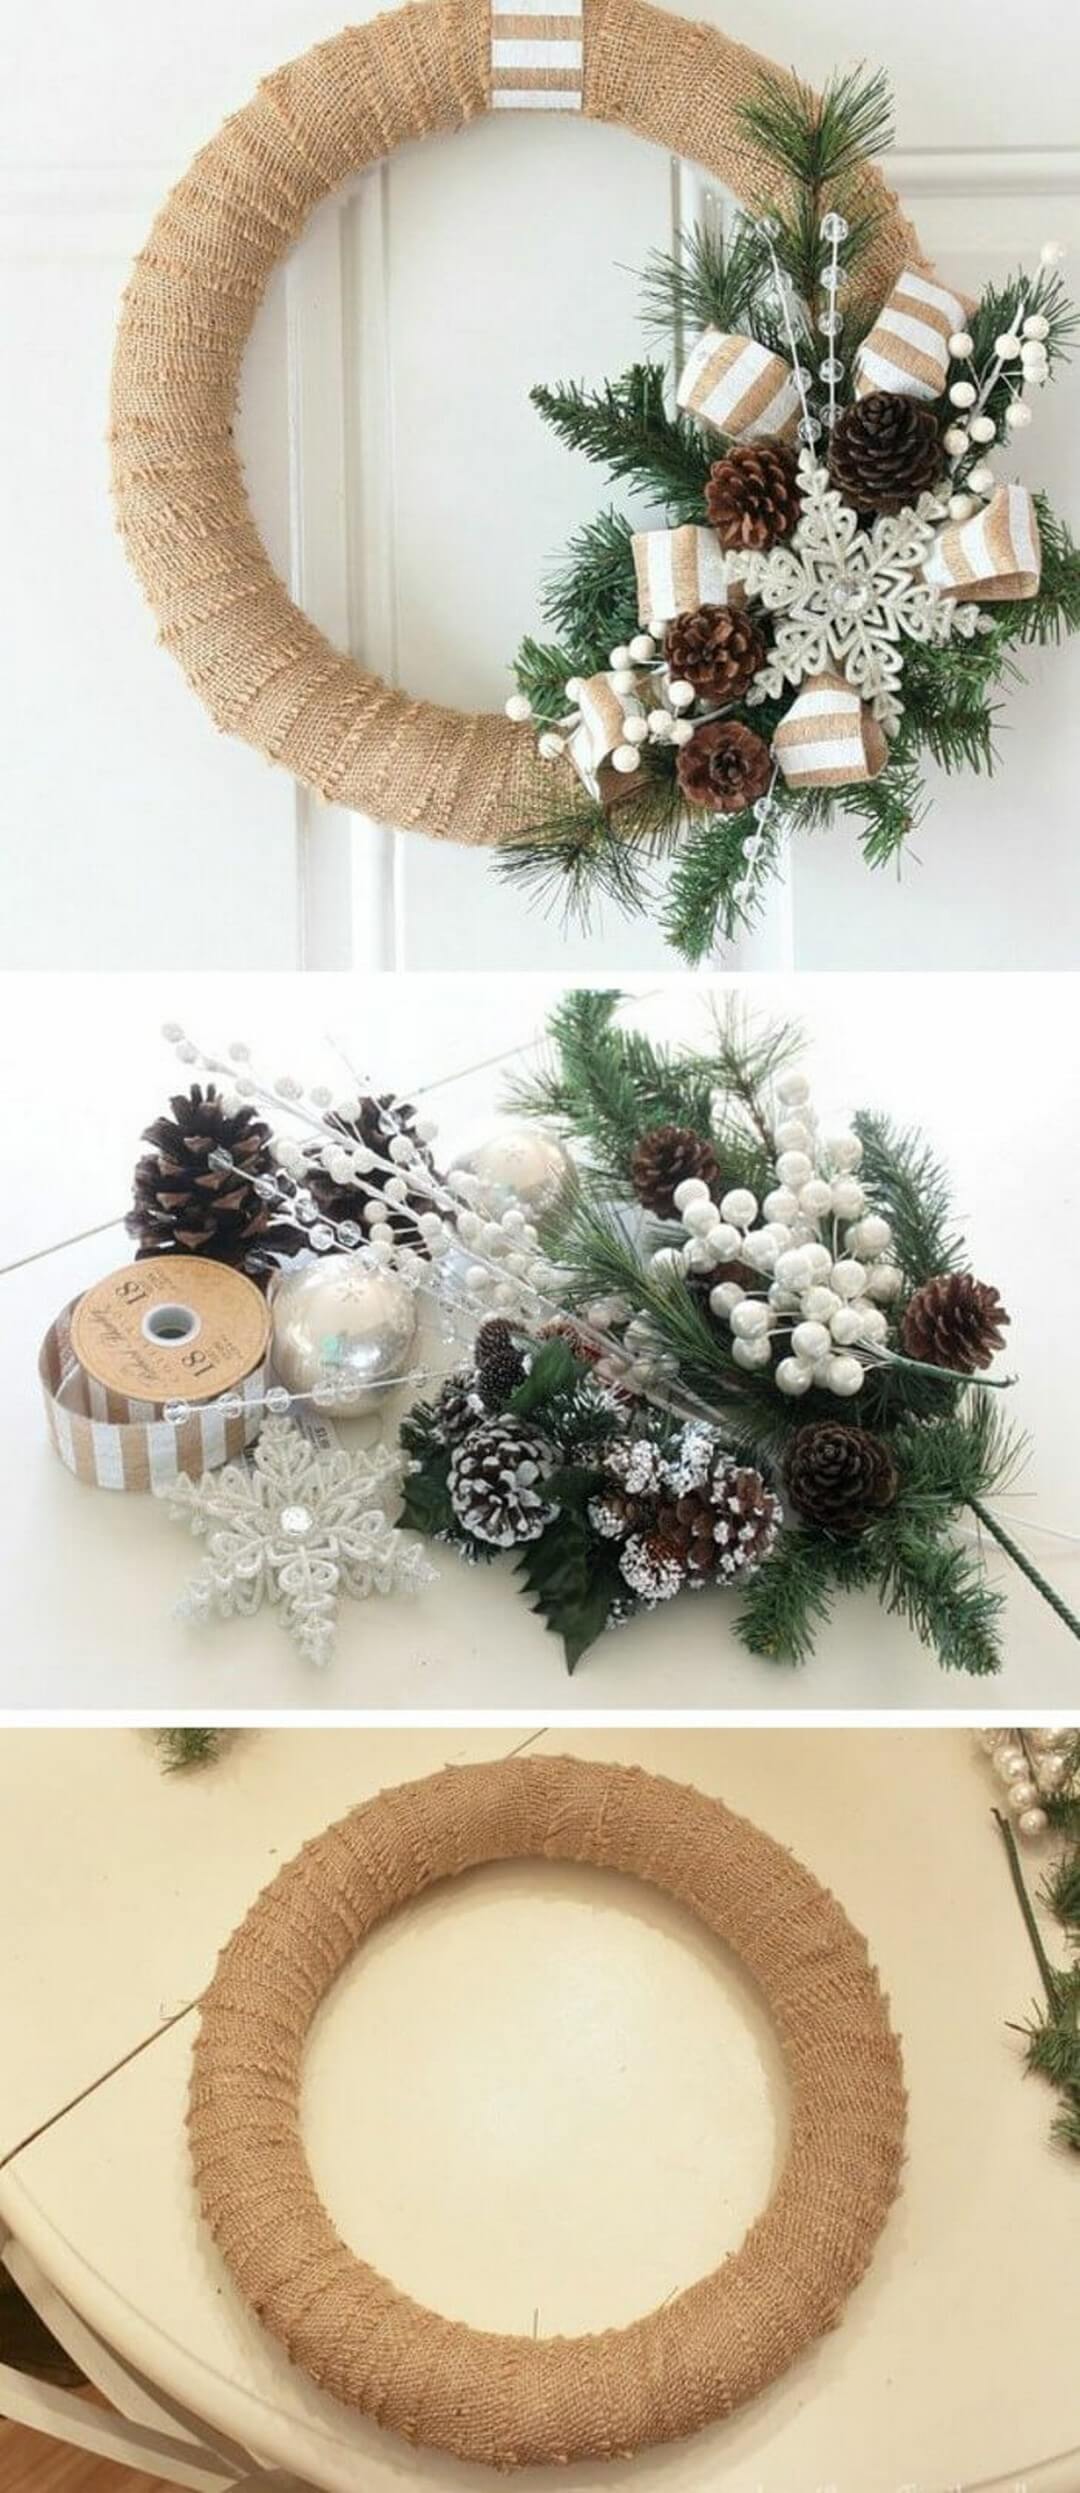 Looking for Christmas wreath ideas for front door? This list is full of simple, easy to make, and cheap Christmas wreaths ideas. Read on now!